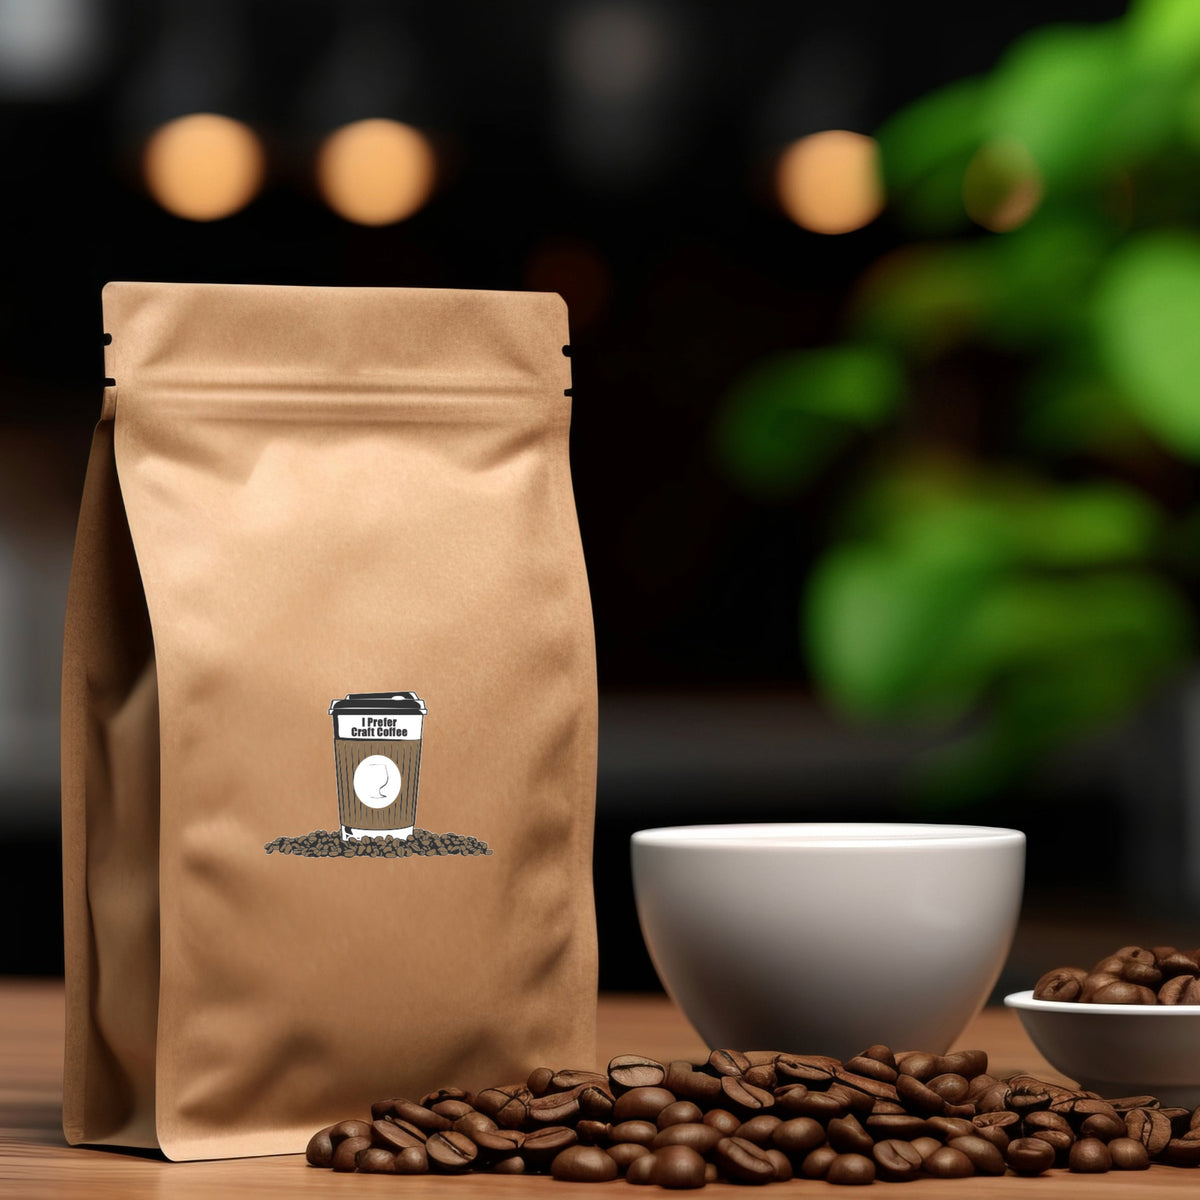 best craft coffee club online now and freshest craft coffee online now shipped fast